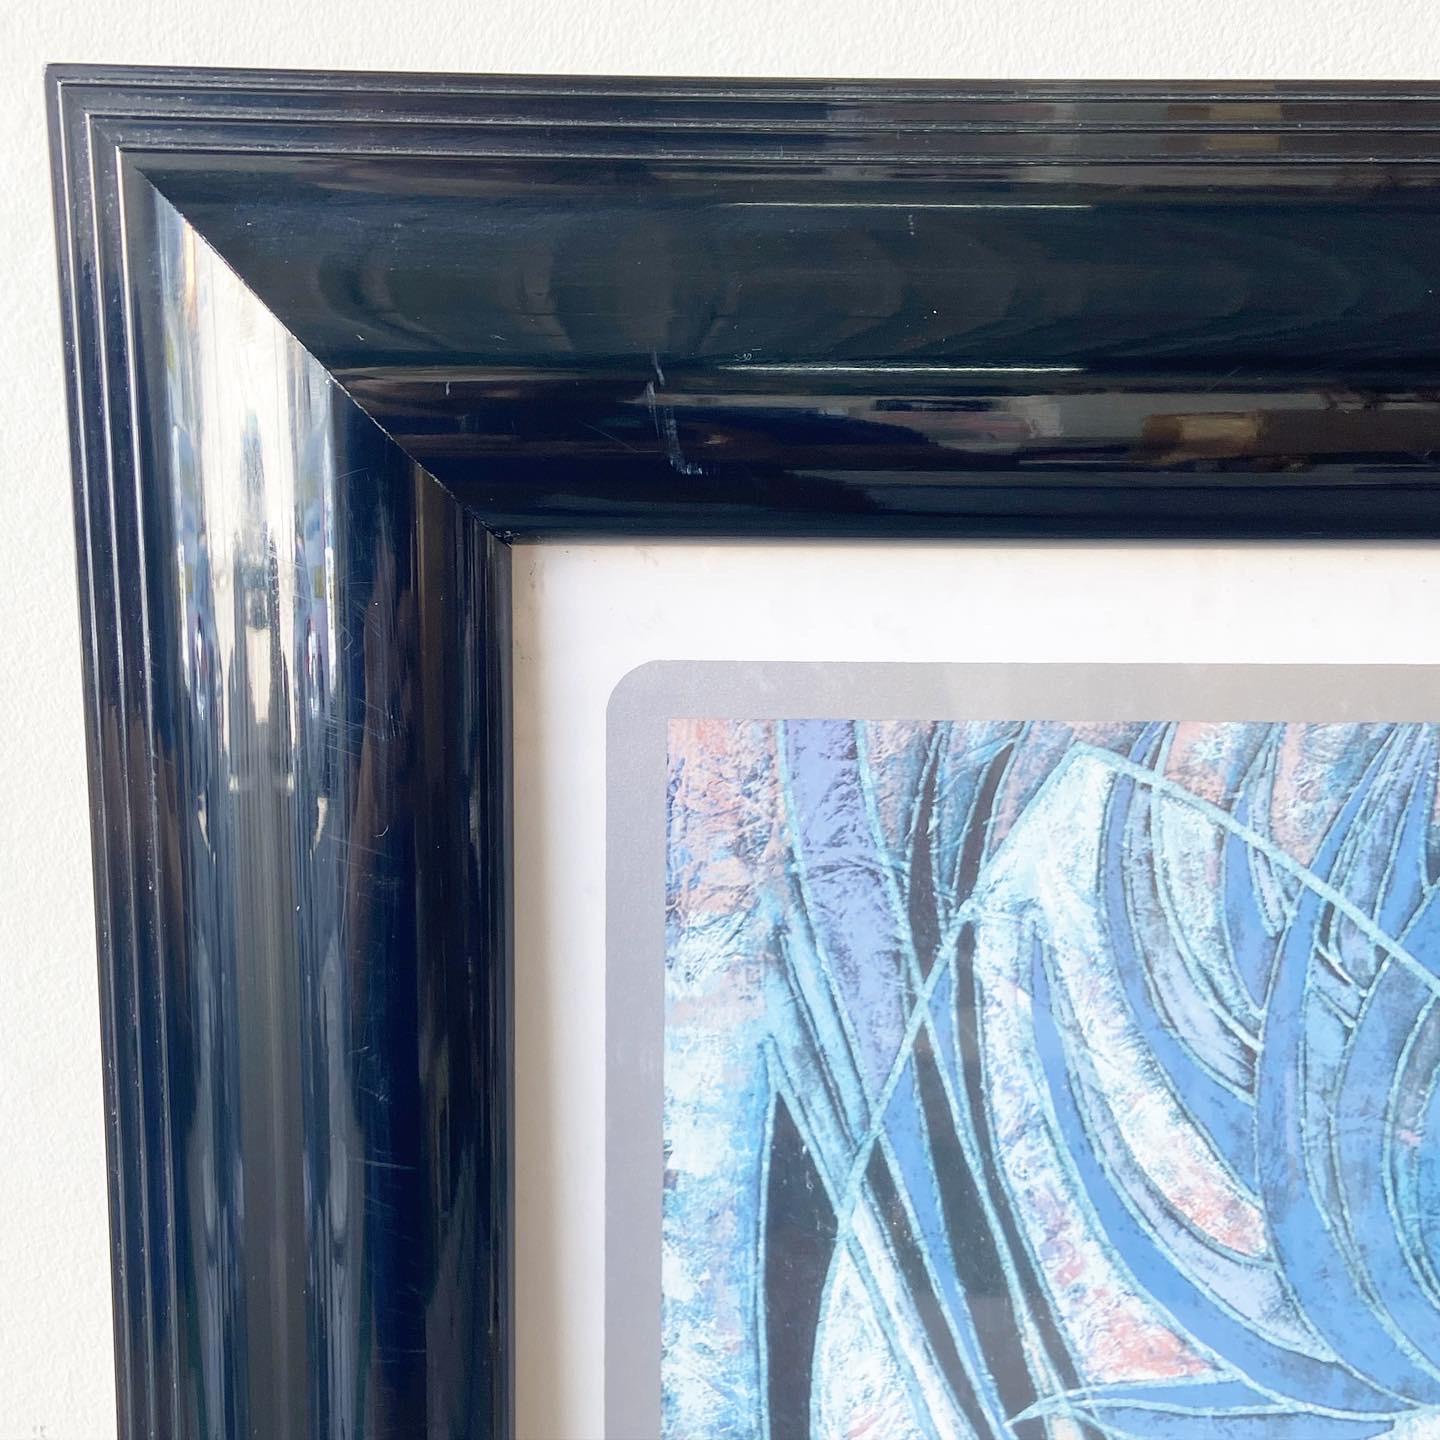 Beautiful work by Wong Shue in a black frame.

Additional information:
Material: Glass, Wood
Color: Black, Blue, Purple
Style: Abstract, Postmodern
Artist: Wong Shue
Time Period: 1980s
Dimension: 38